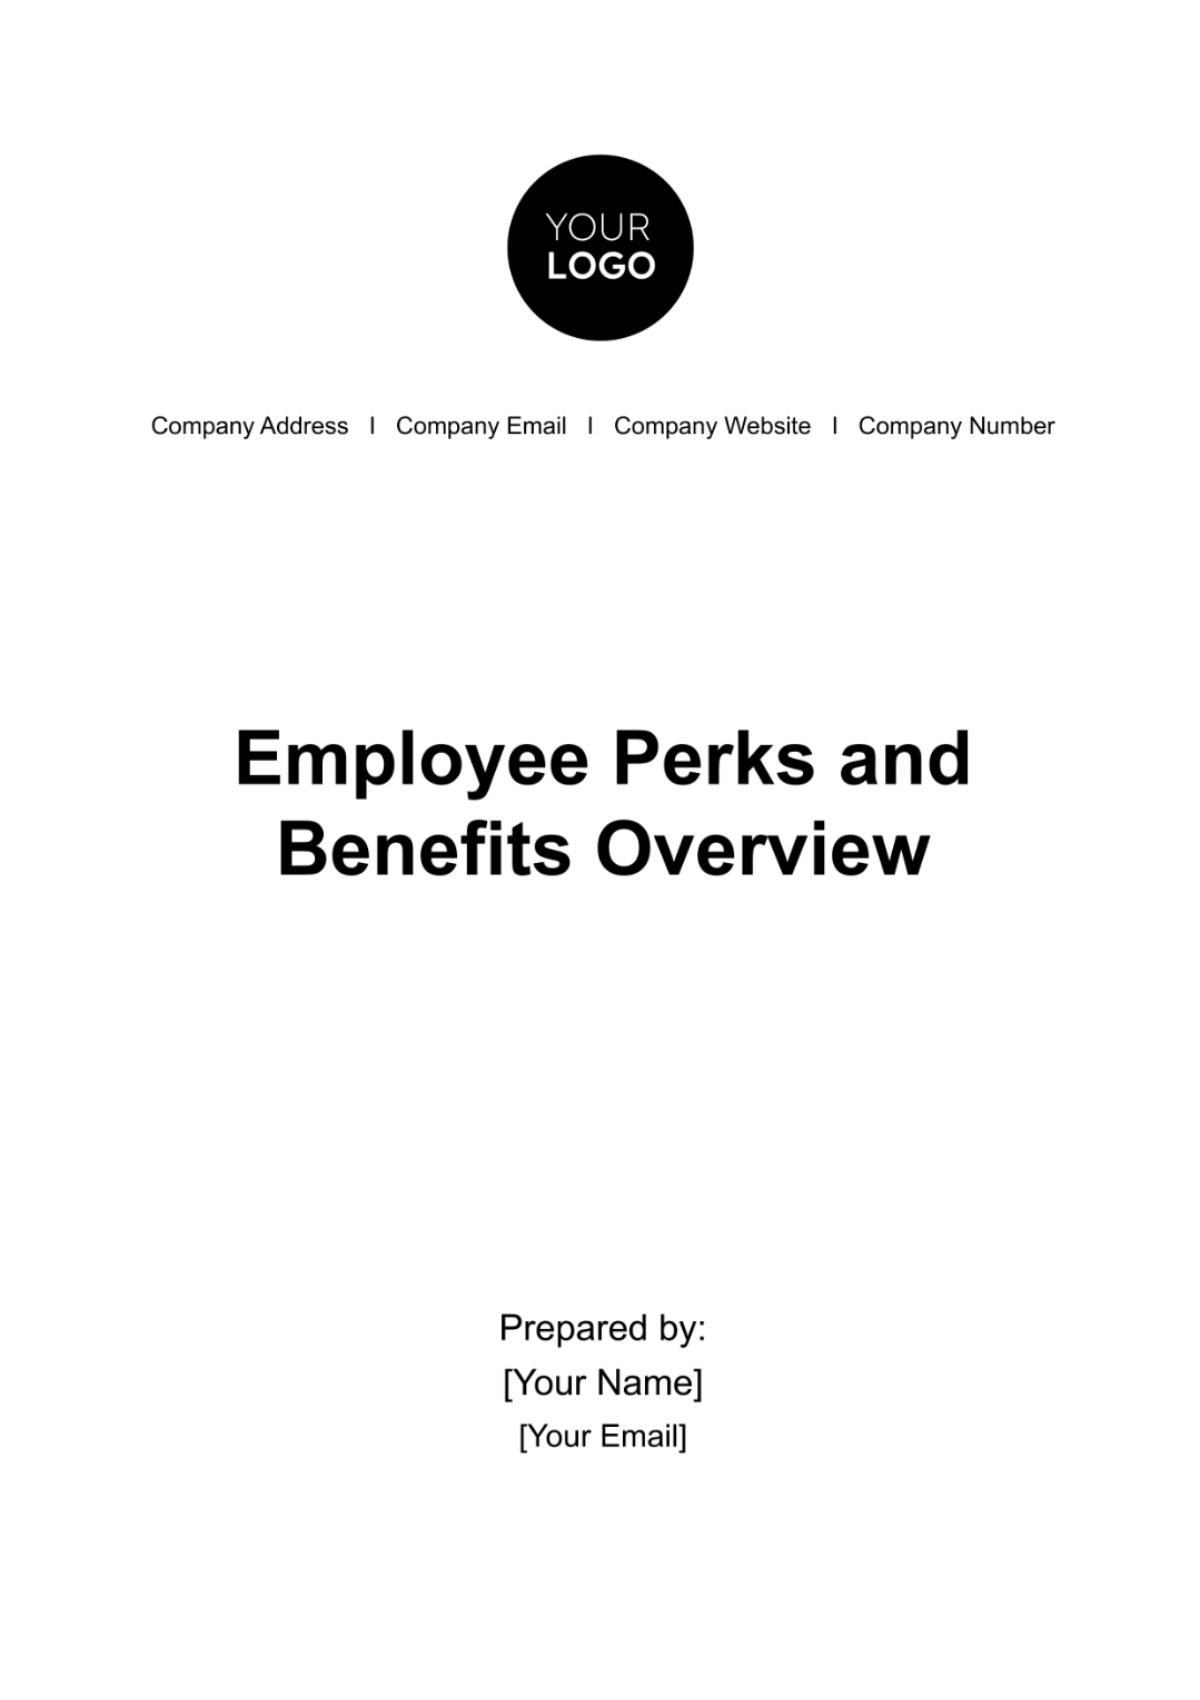 Employee Benefits & Perks Overview HR Template